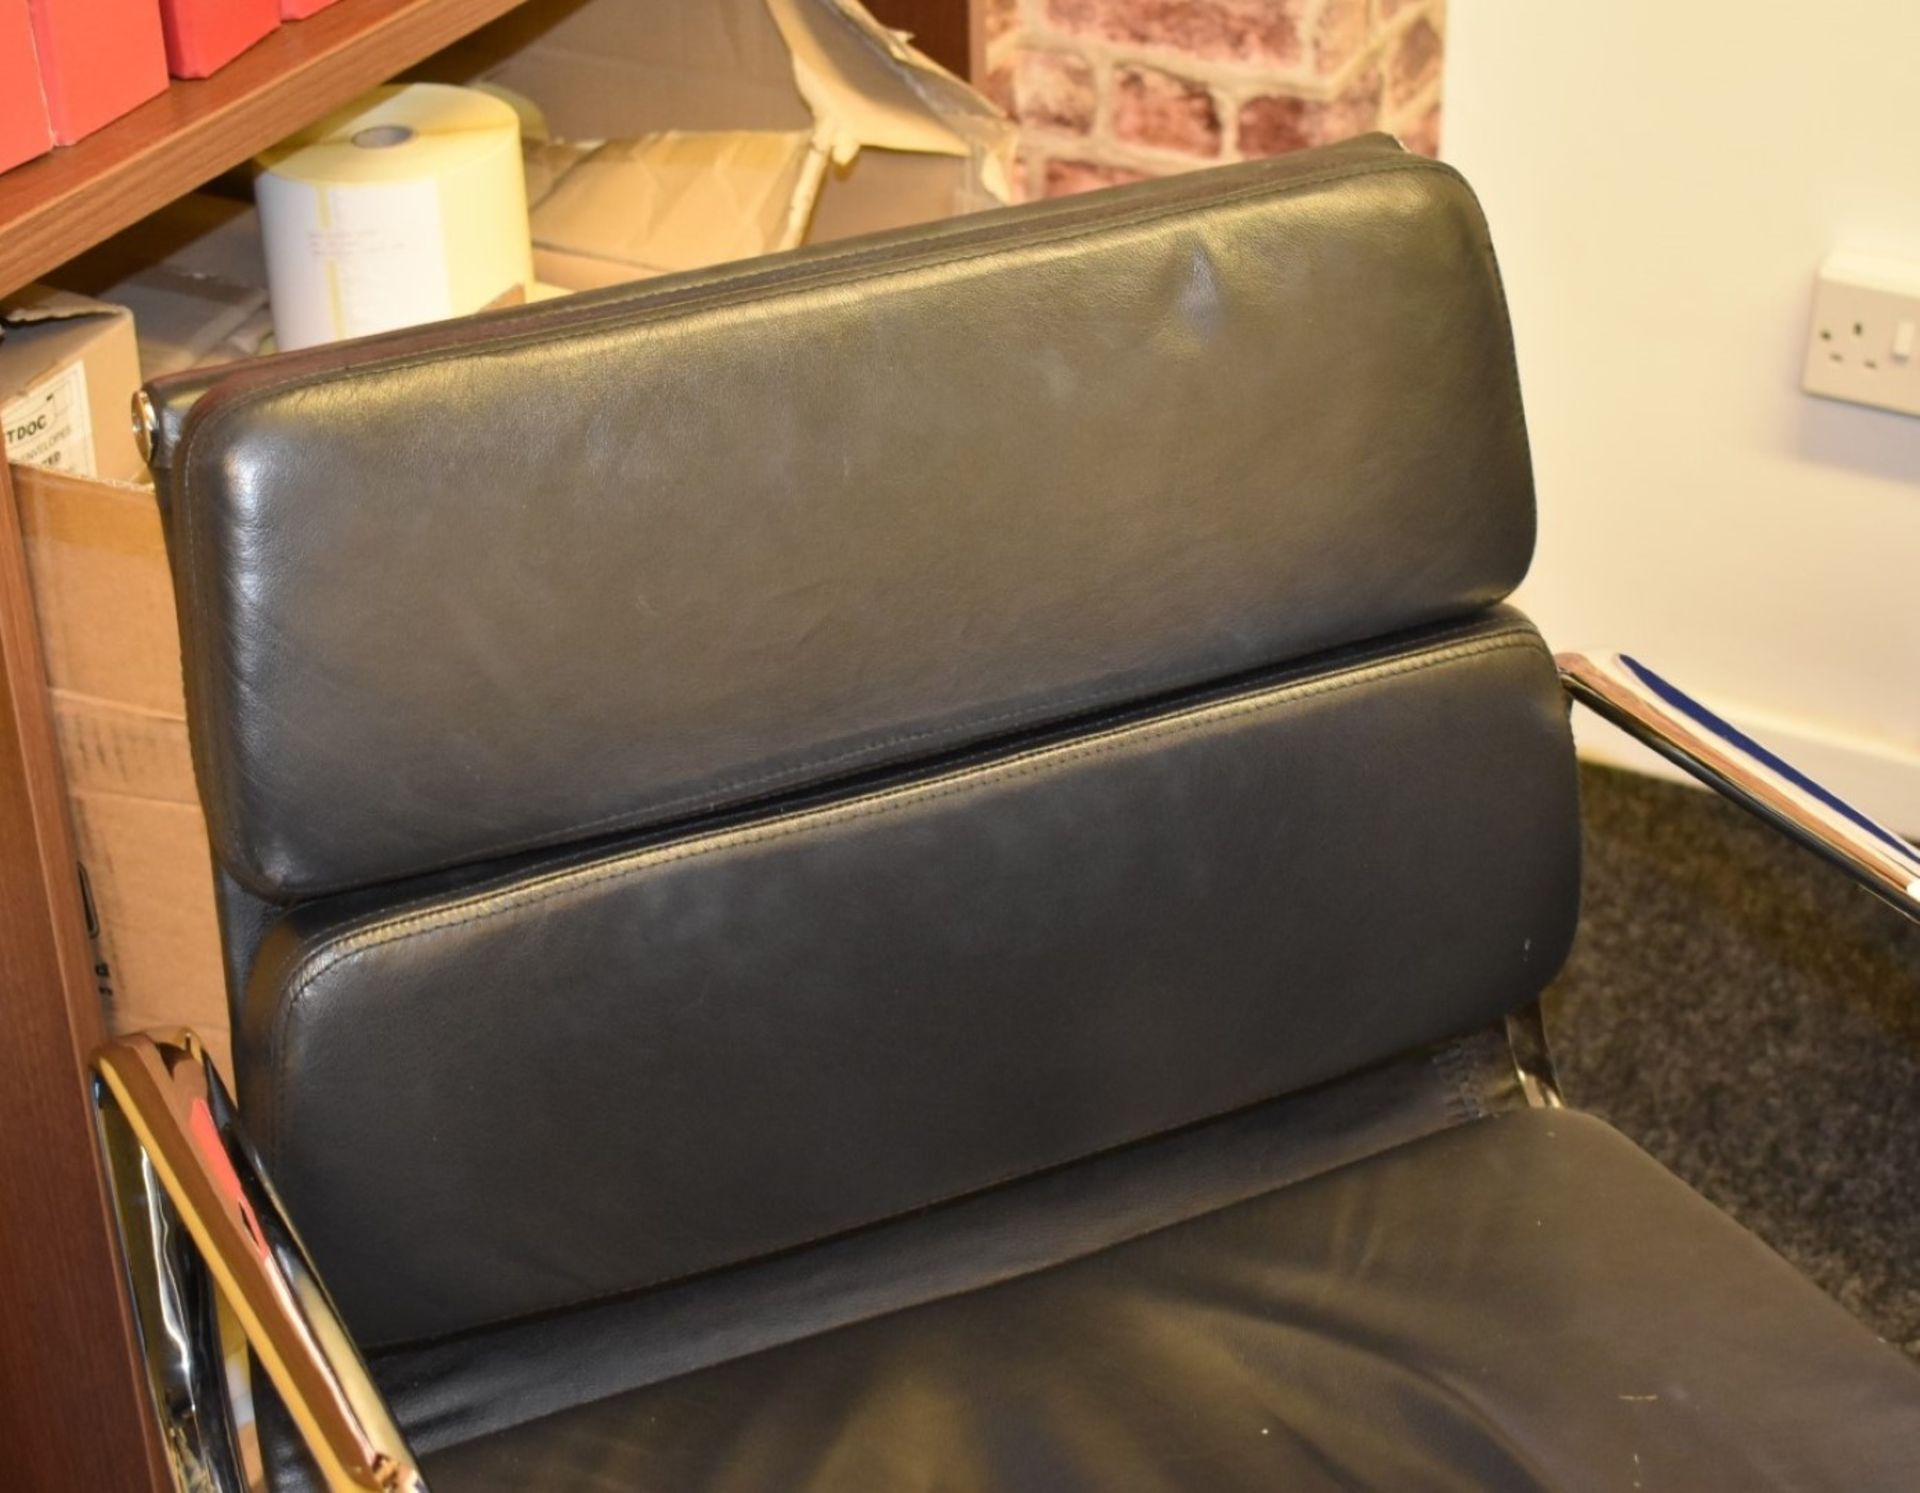 1 x Eames Inspired Office Chair - Swivel Office Chair Upholstered in Black Leather - Image 5 of 6